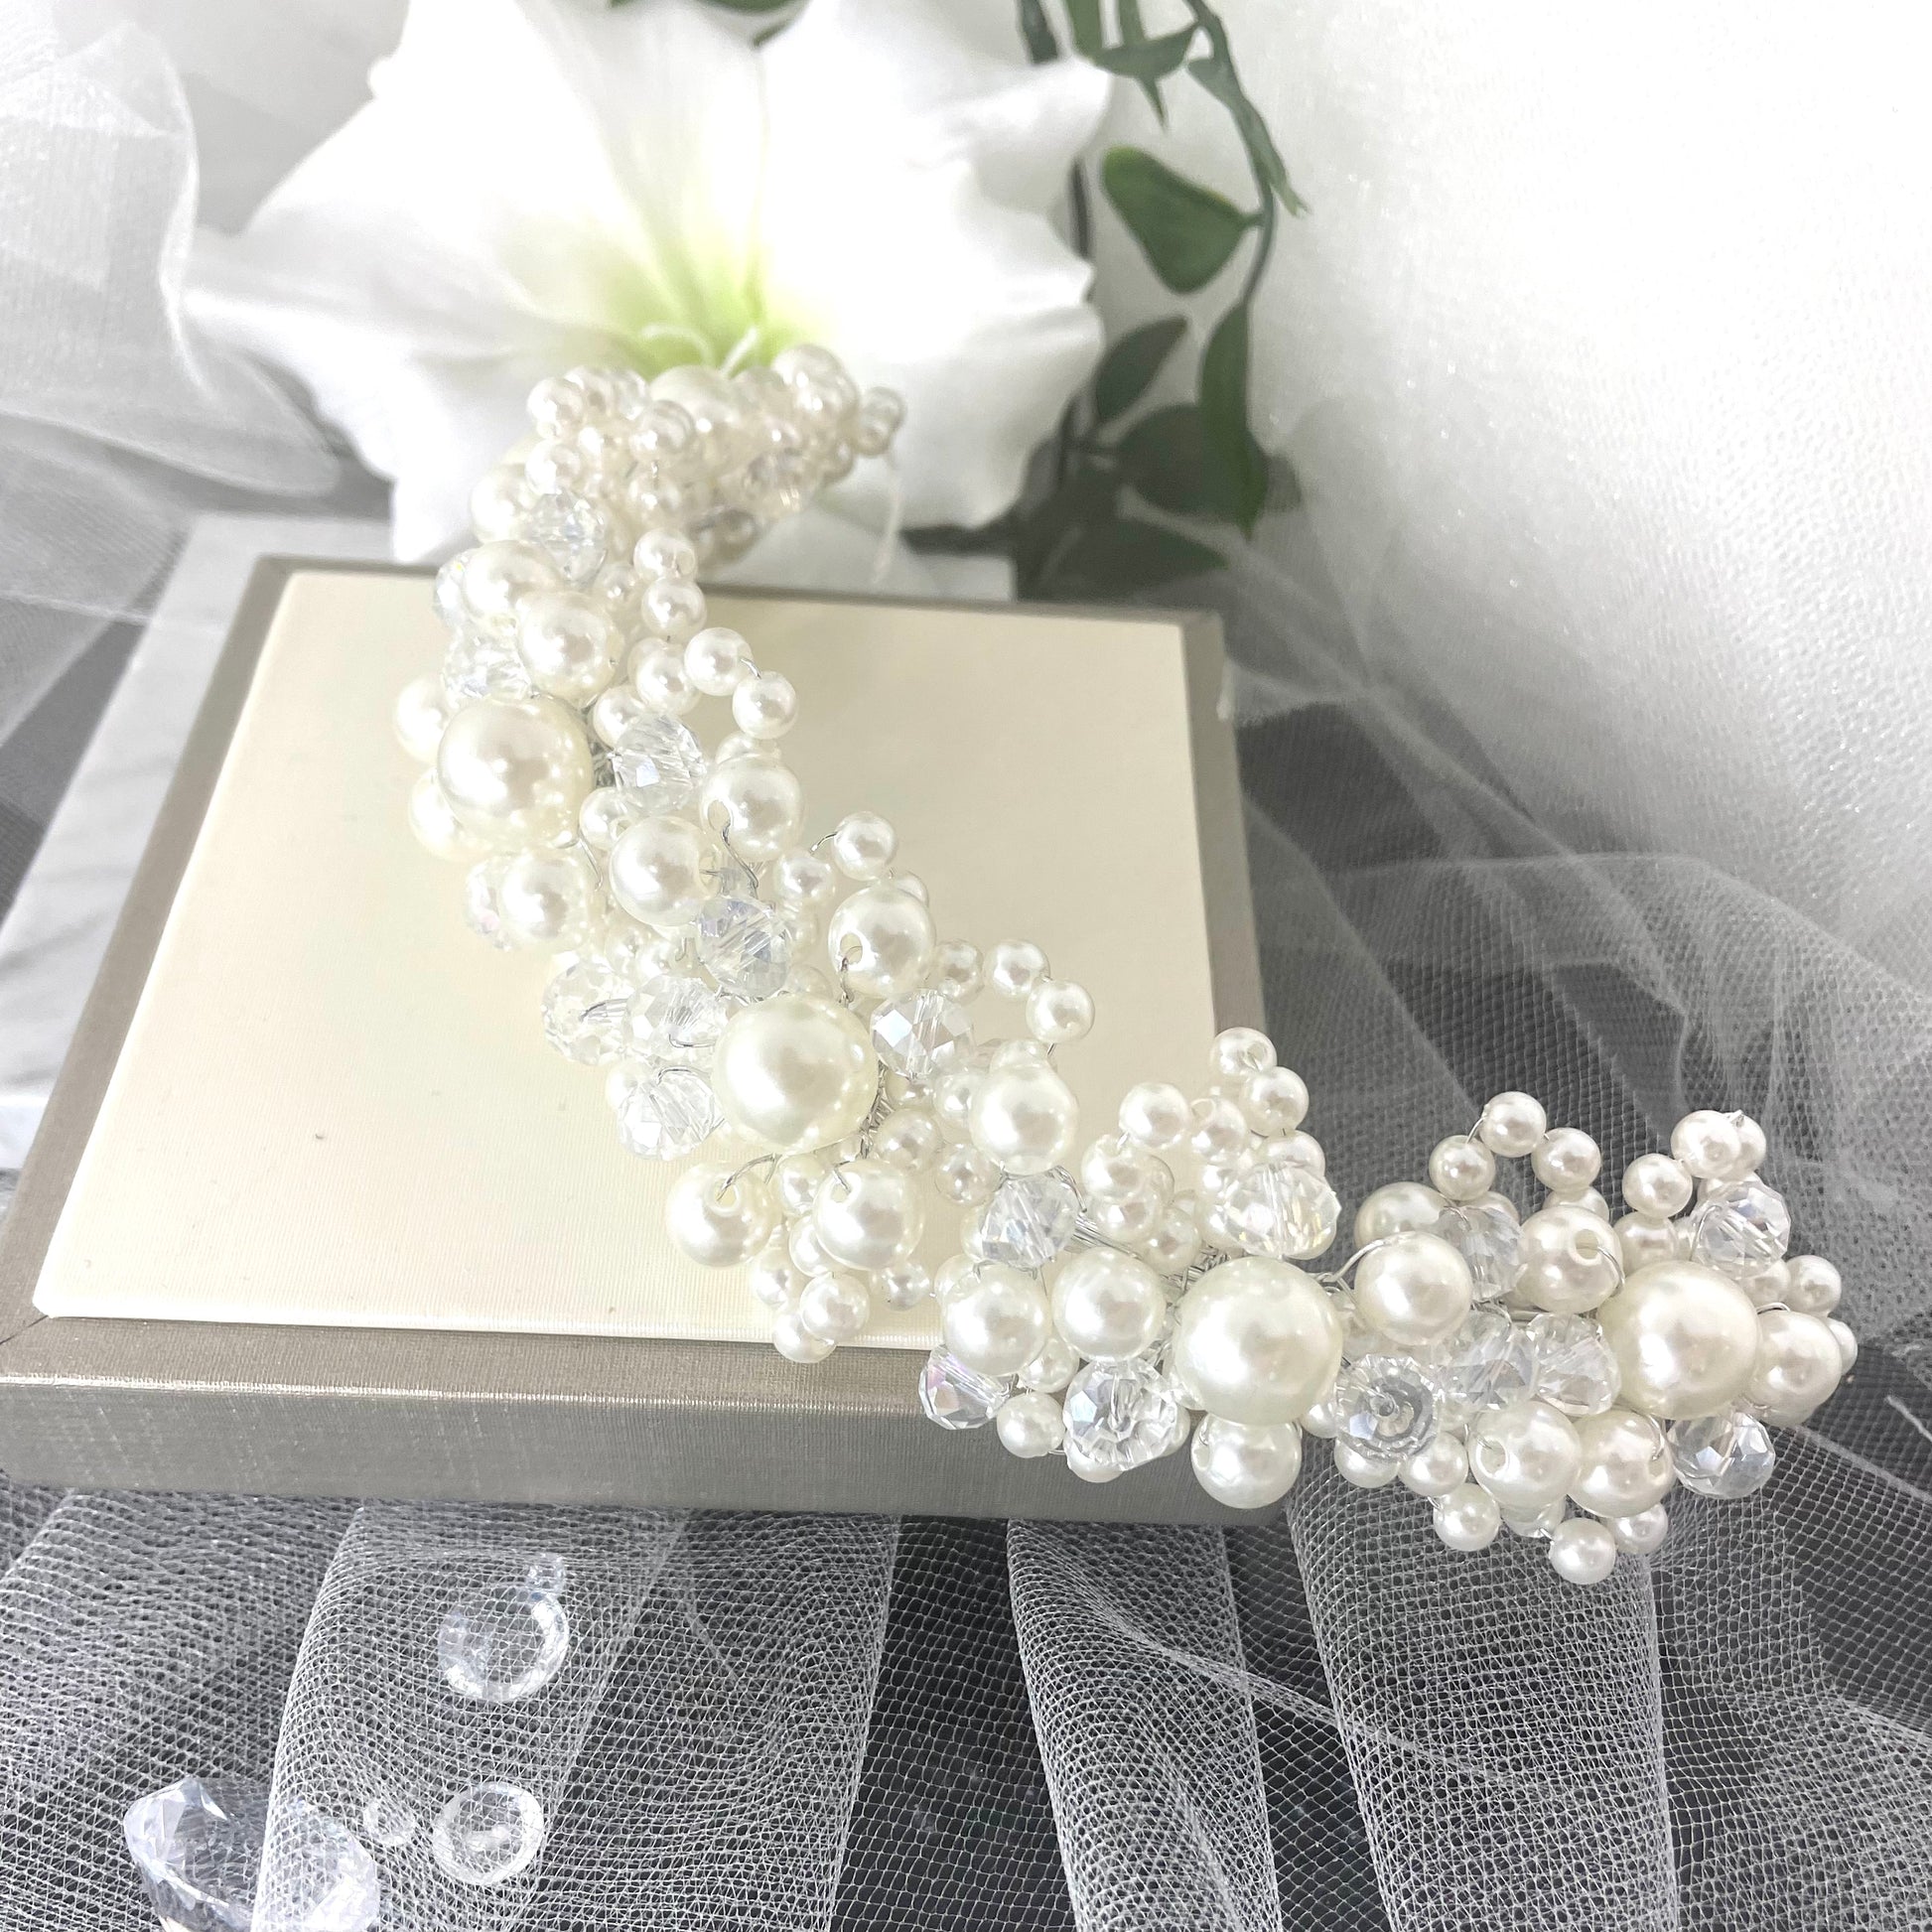 Exquisite Emily Bridal Headband, handmade with divine crystals and pearls, featuring a delicate wire-crafted design to enhance any elegant bridal ensemble.